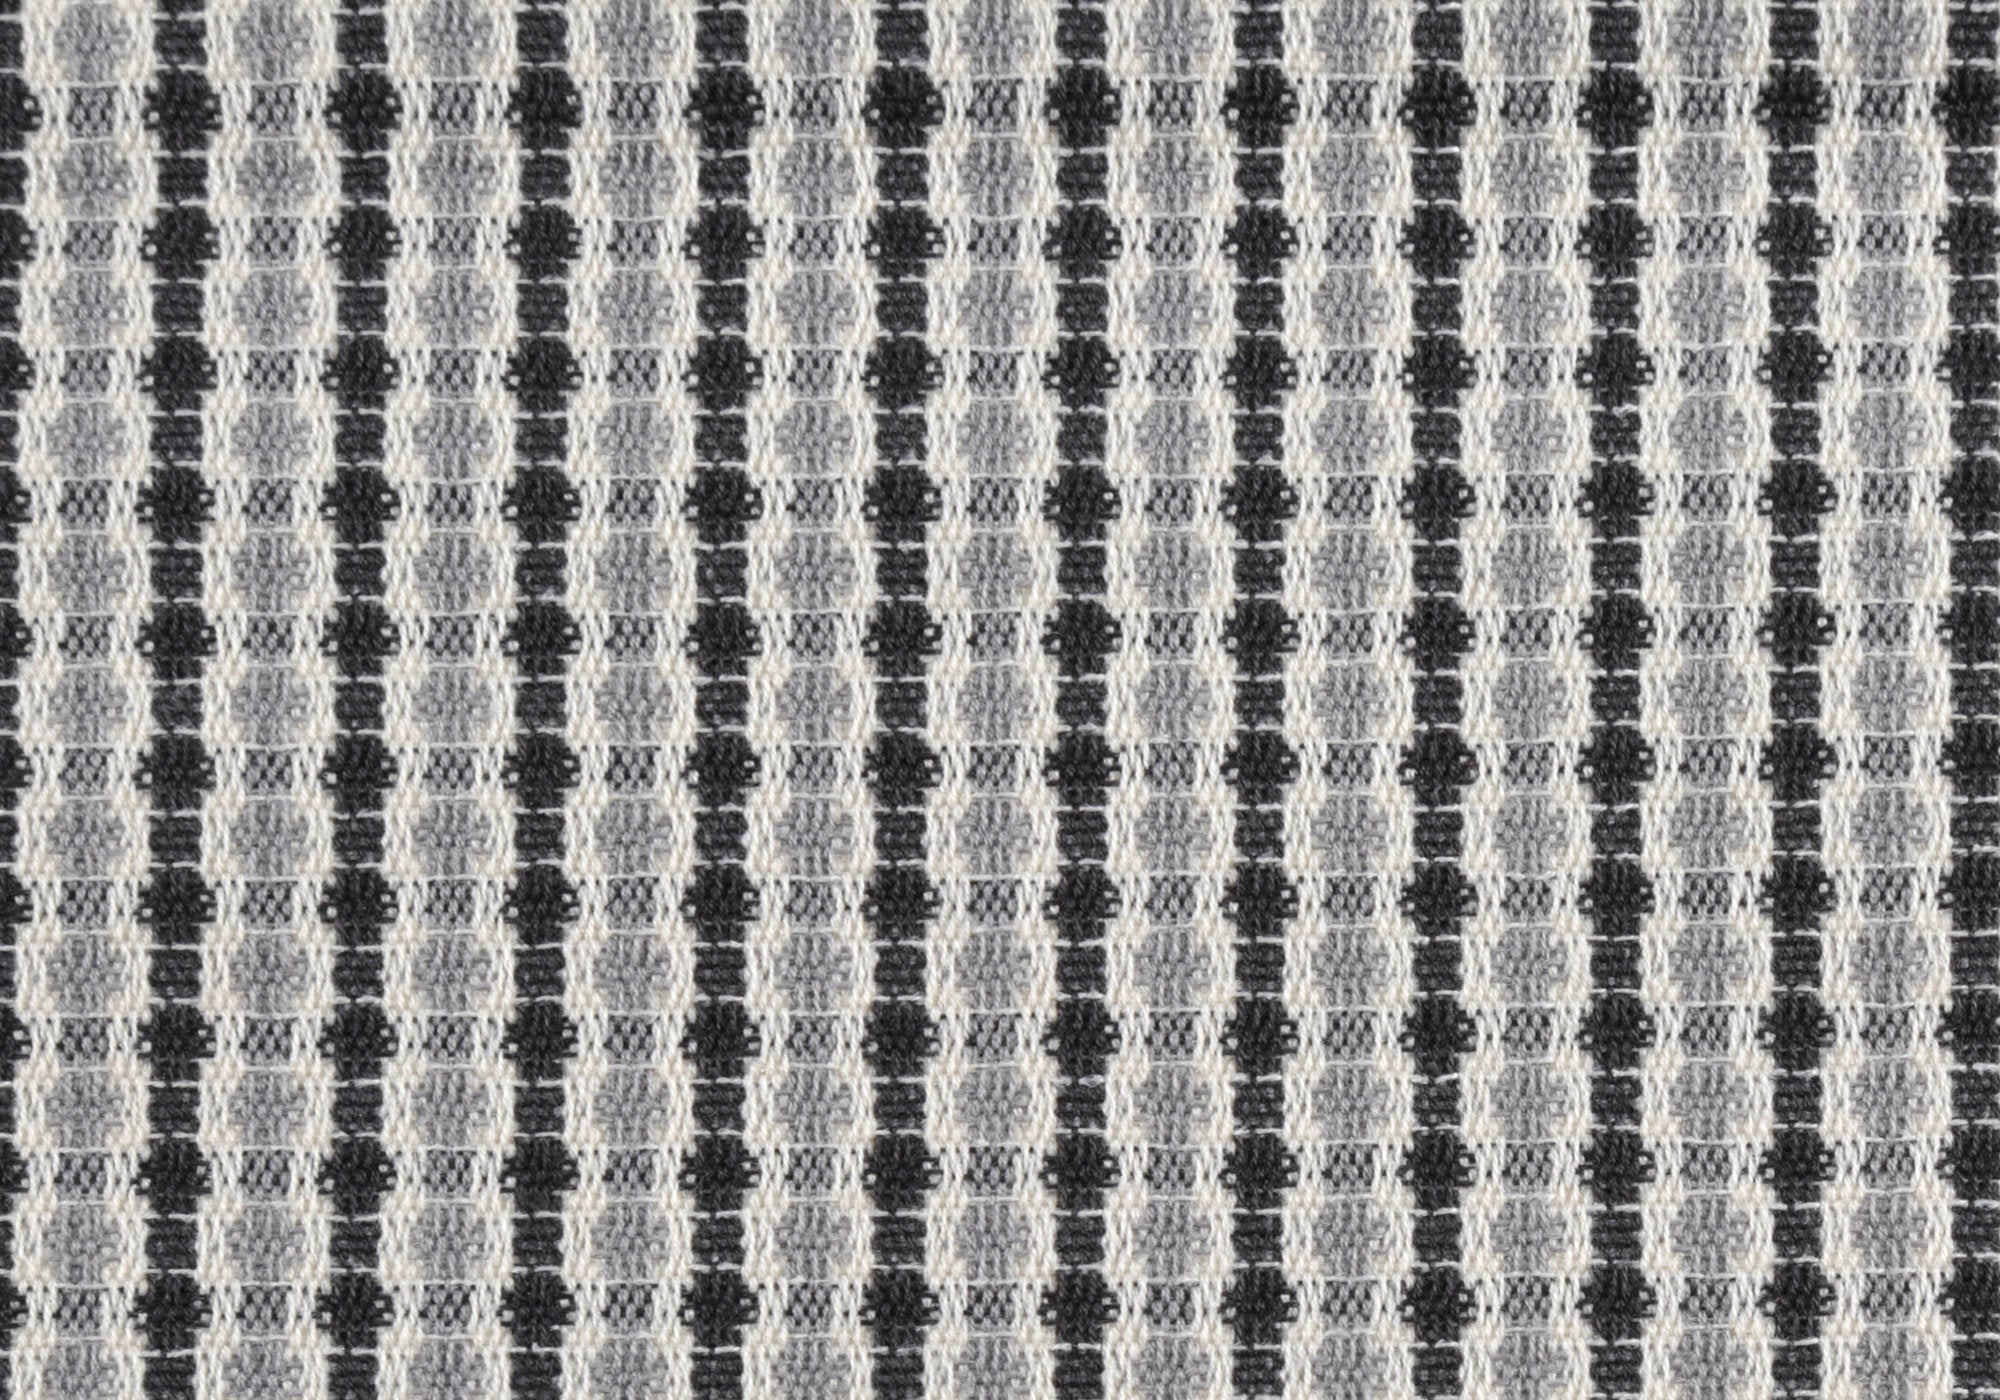 Accent Chair - Light Grey / Black Abstract Dot Fabric